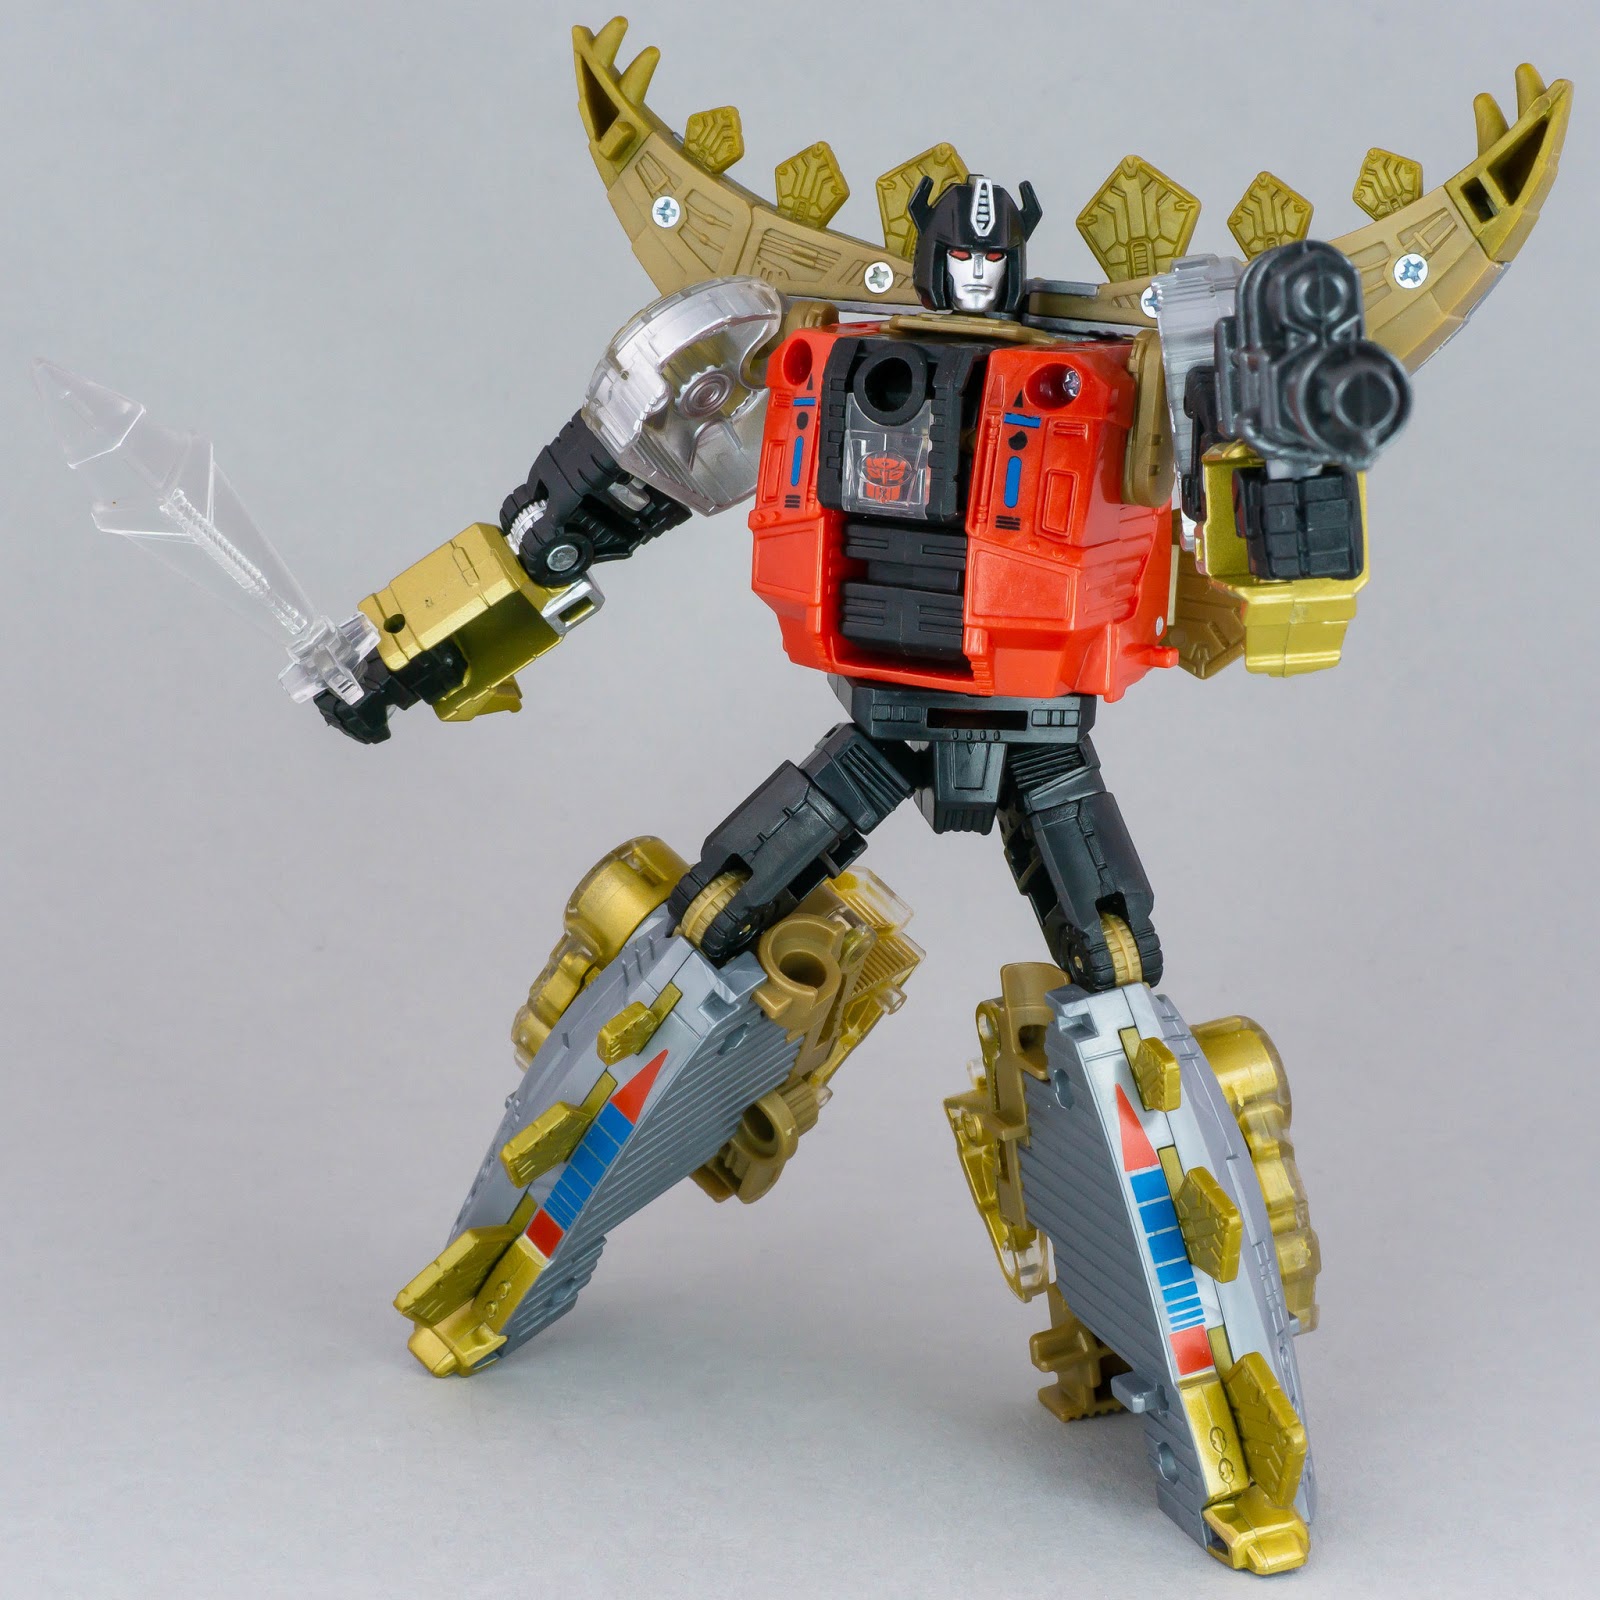 Transformers Power of the Primes Snarl robot mode posed 1